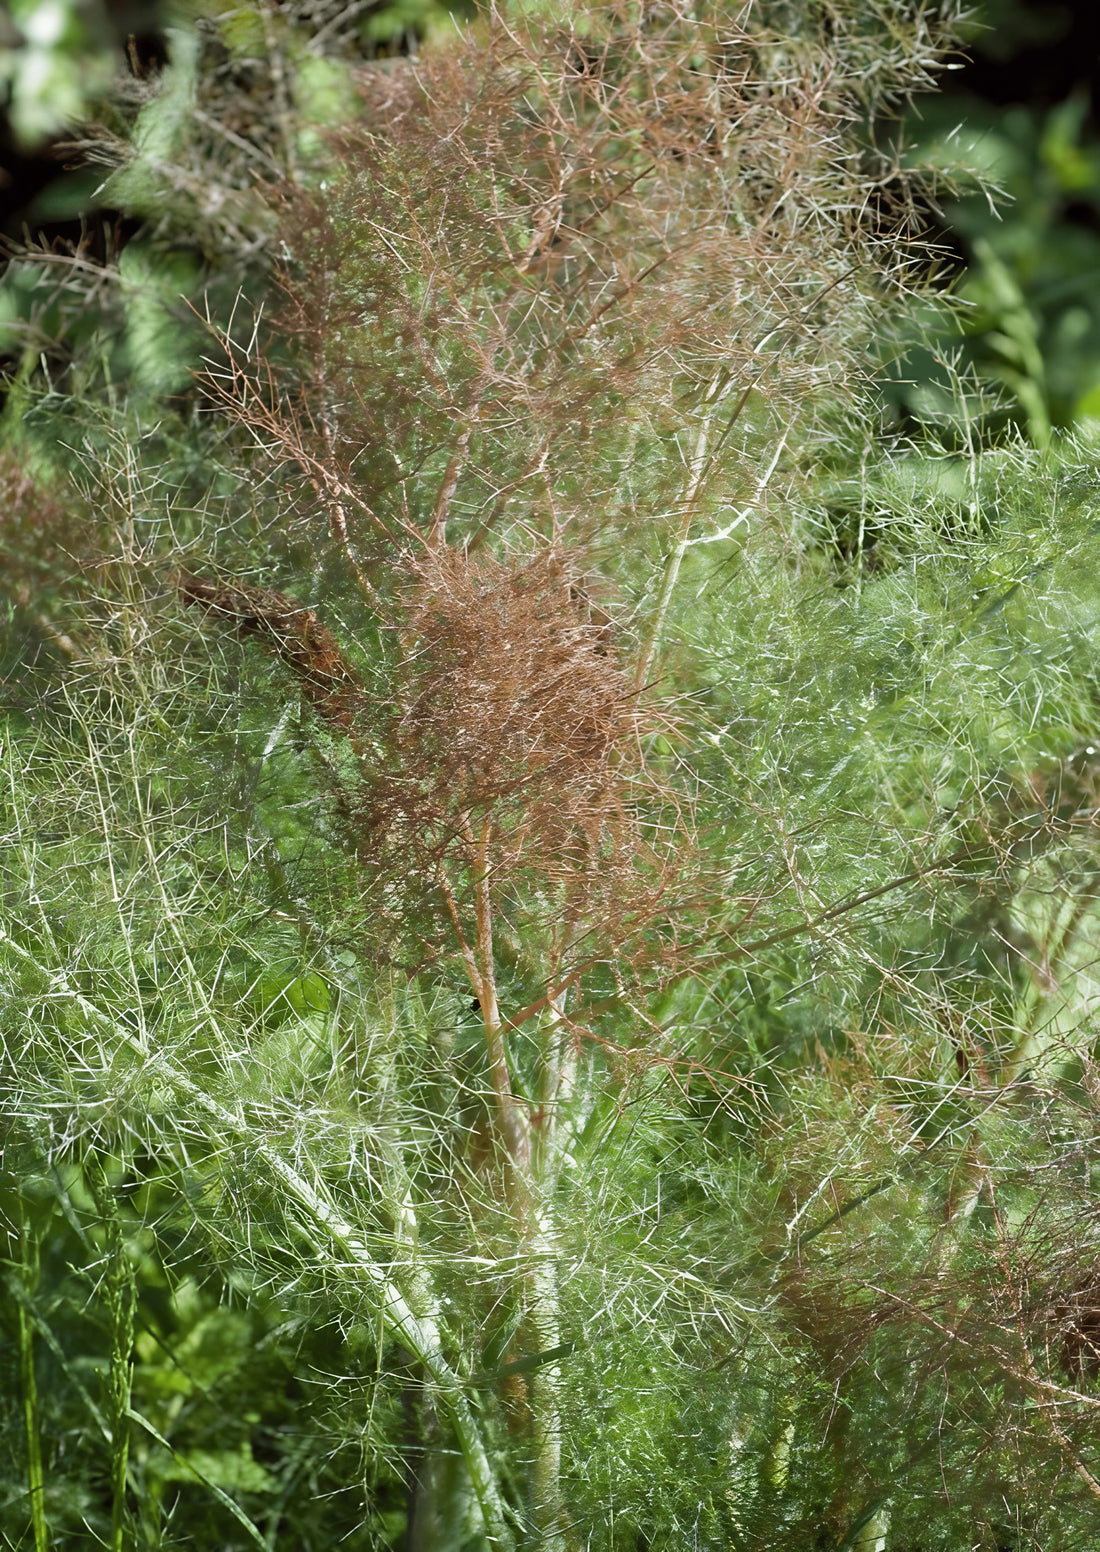 Detail of Bronze Fennel showing its characteristic bronze-colored foliage